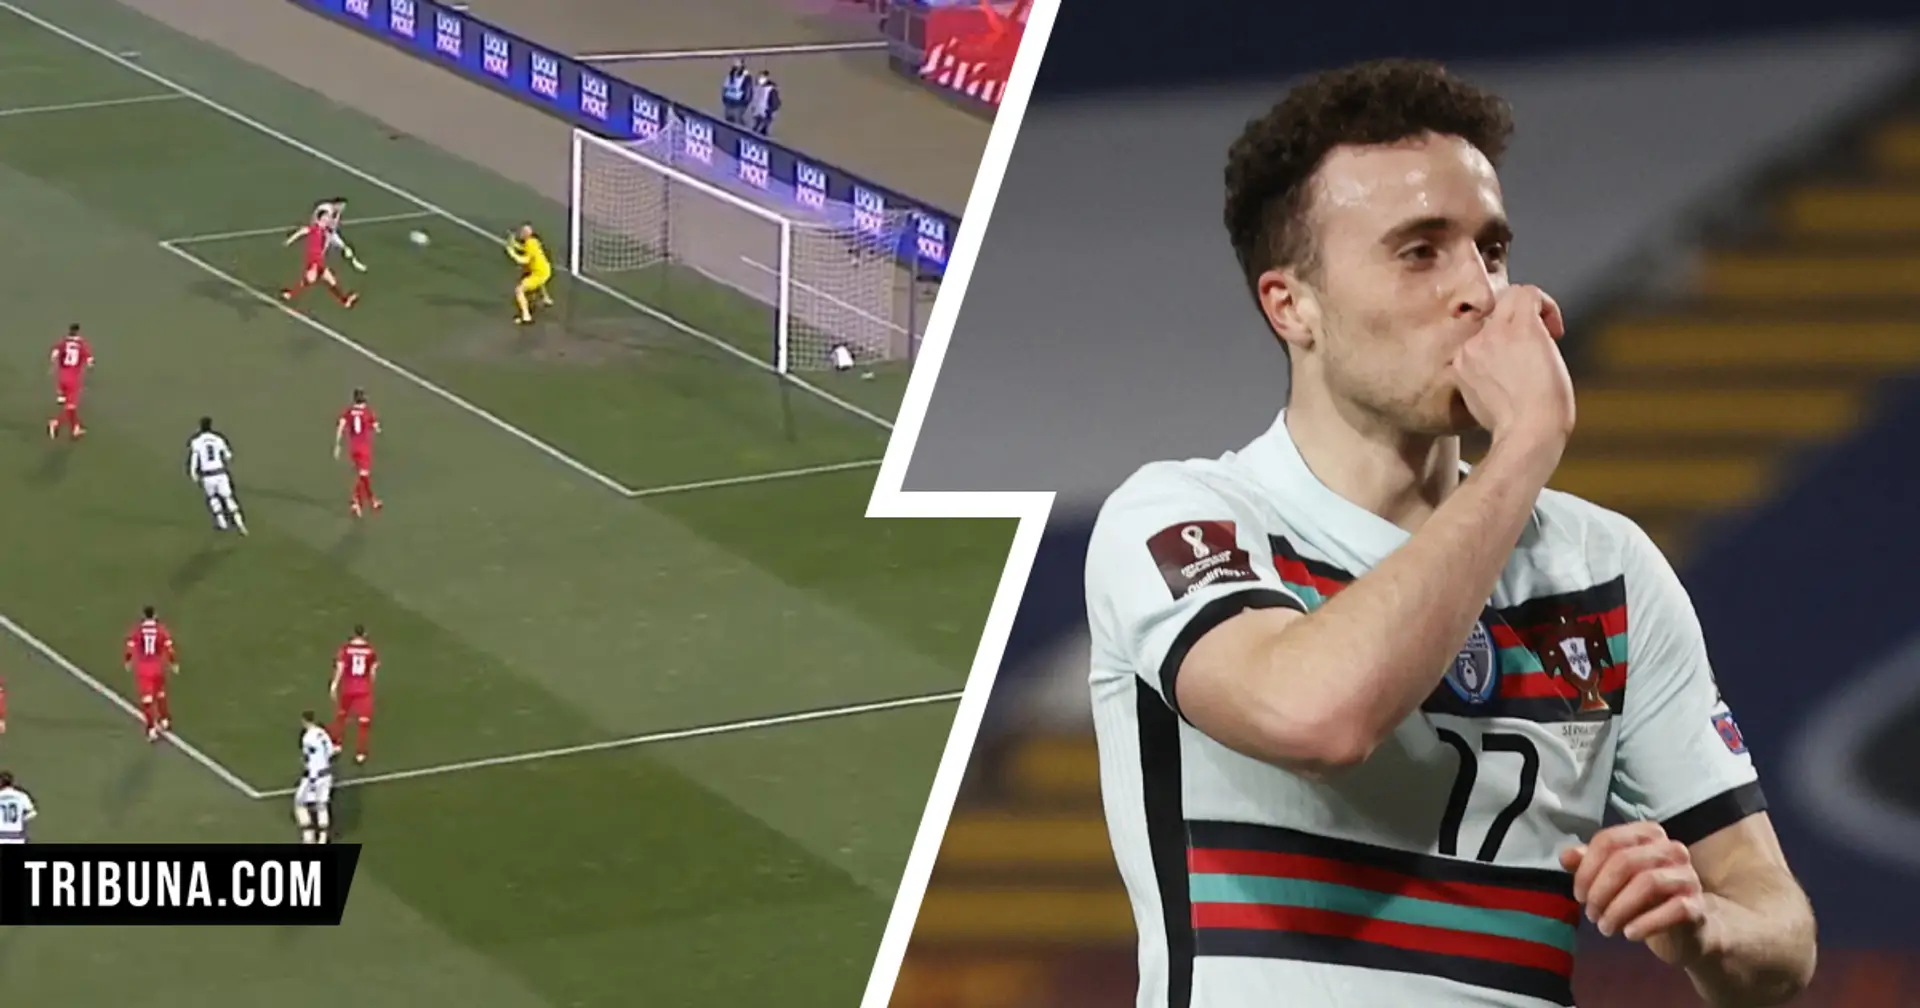 Diogo Jota's excellent run and header for his first goal against Serbia deserve a closer look